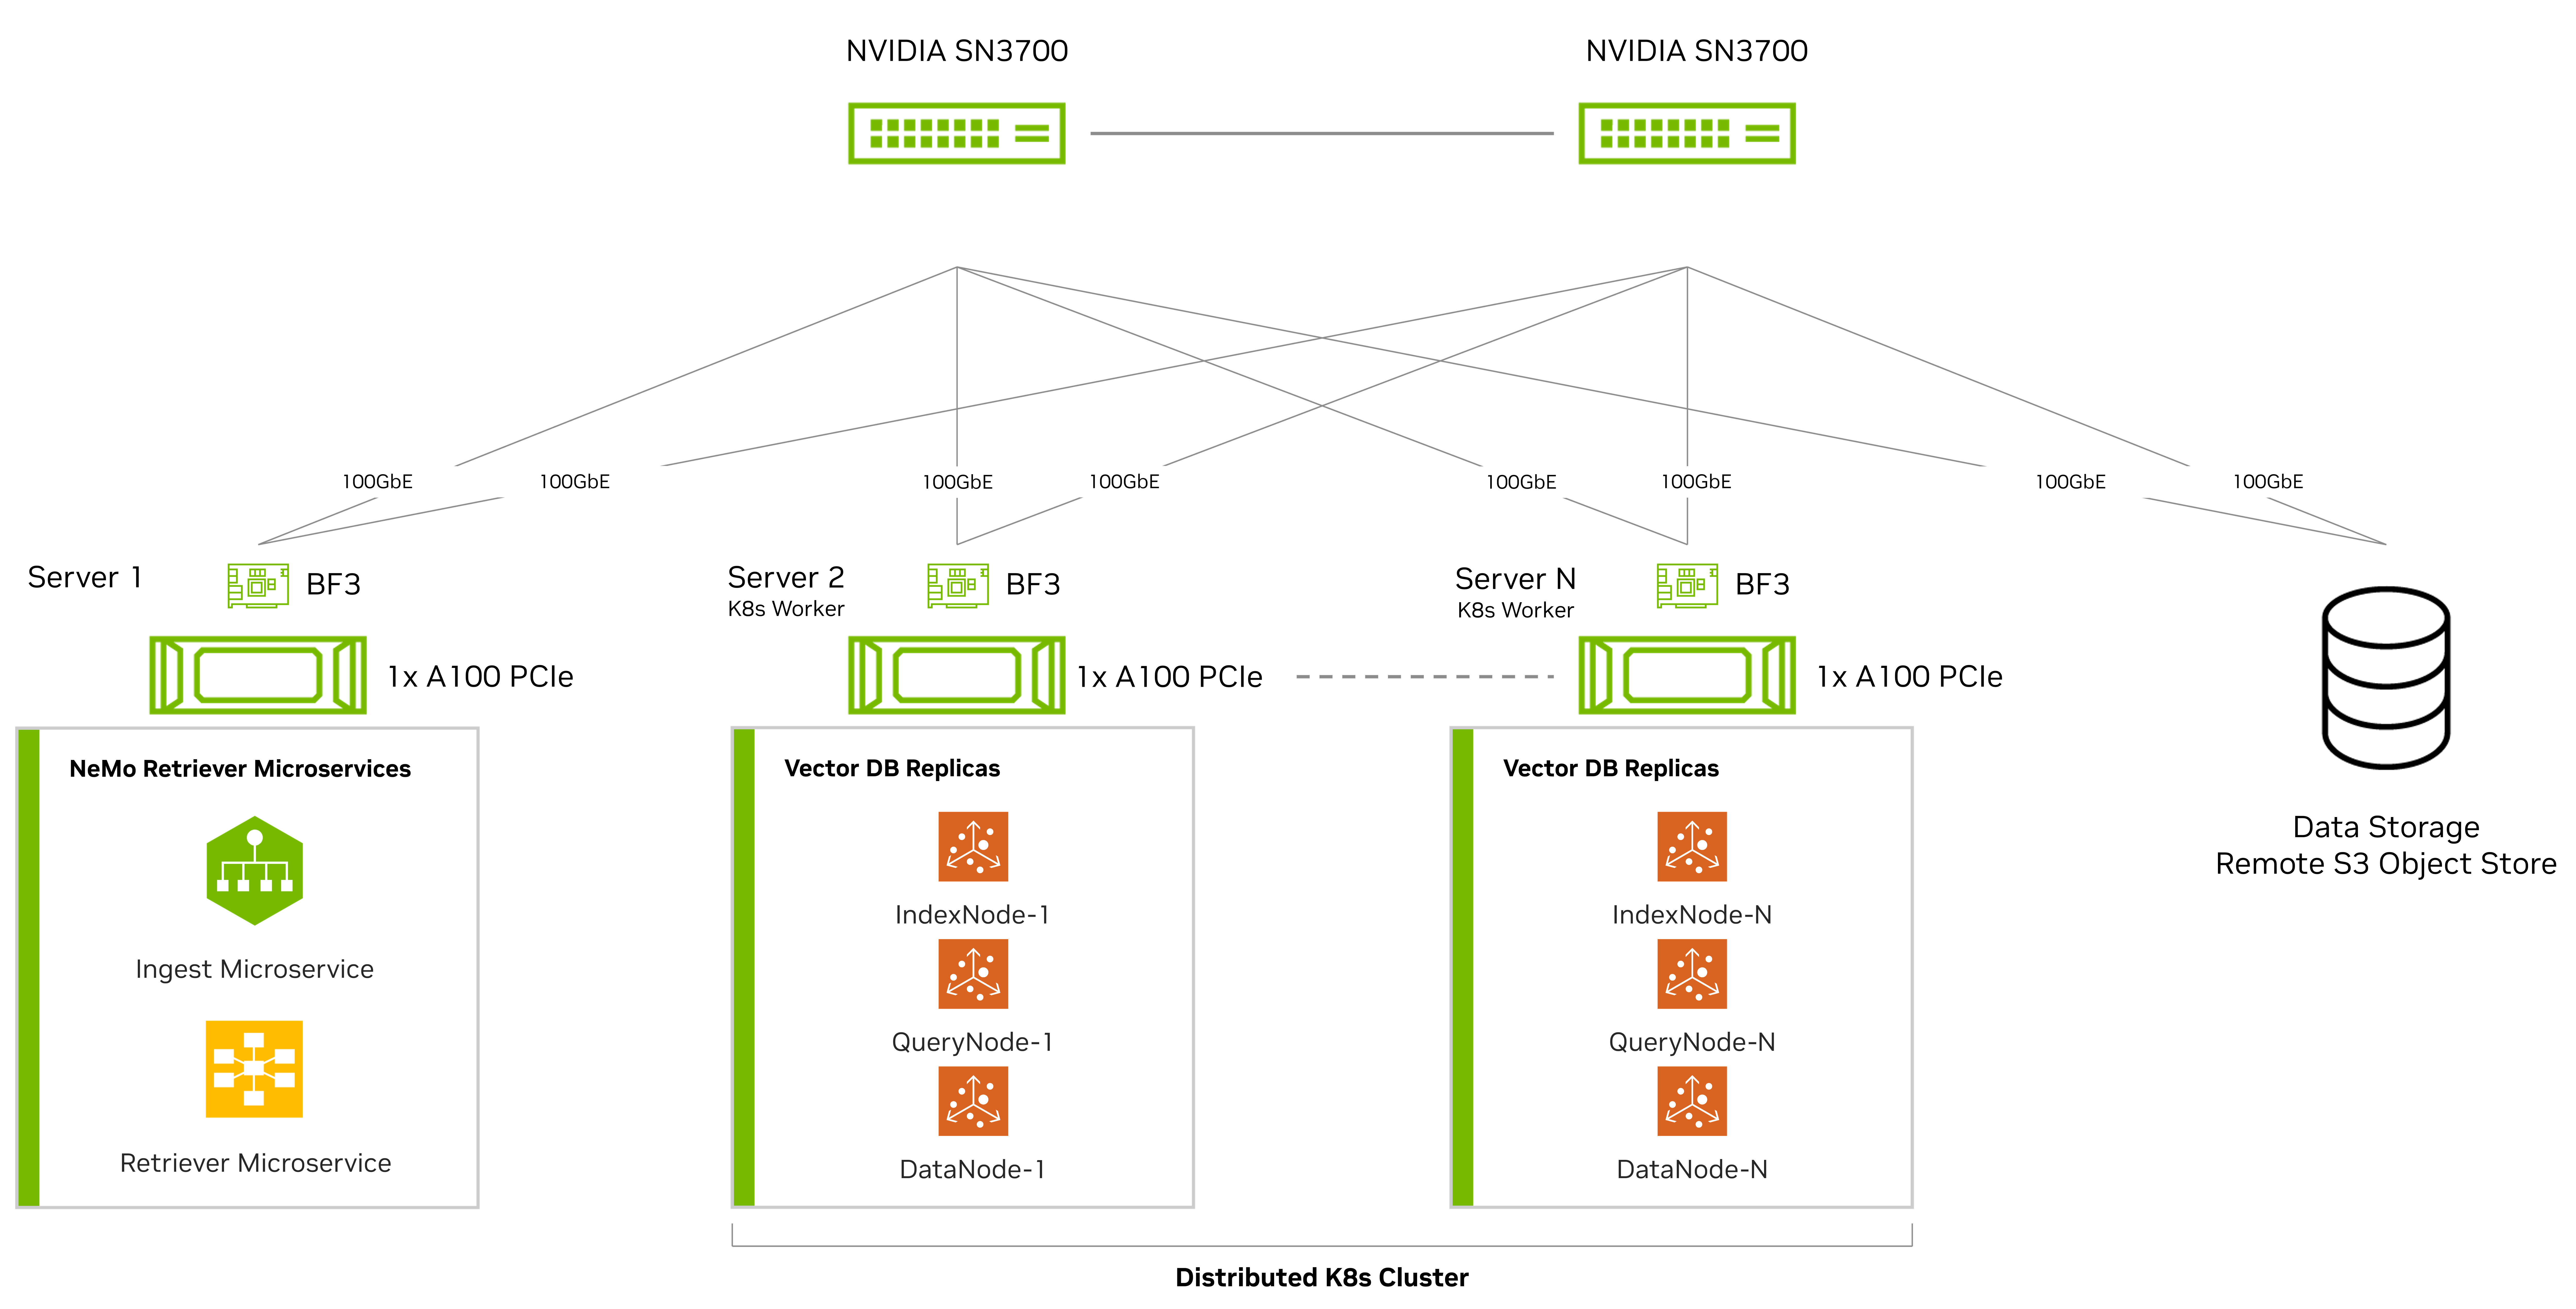 Diagram shows the NeMo Retriever microservices running on multiple GPU nodes, each having one NVIDIA A100 GPU, connected over NVIDIA-accelerated Ethernet networking to a remote data storage platform. 